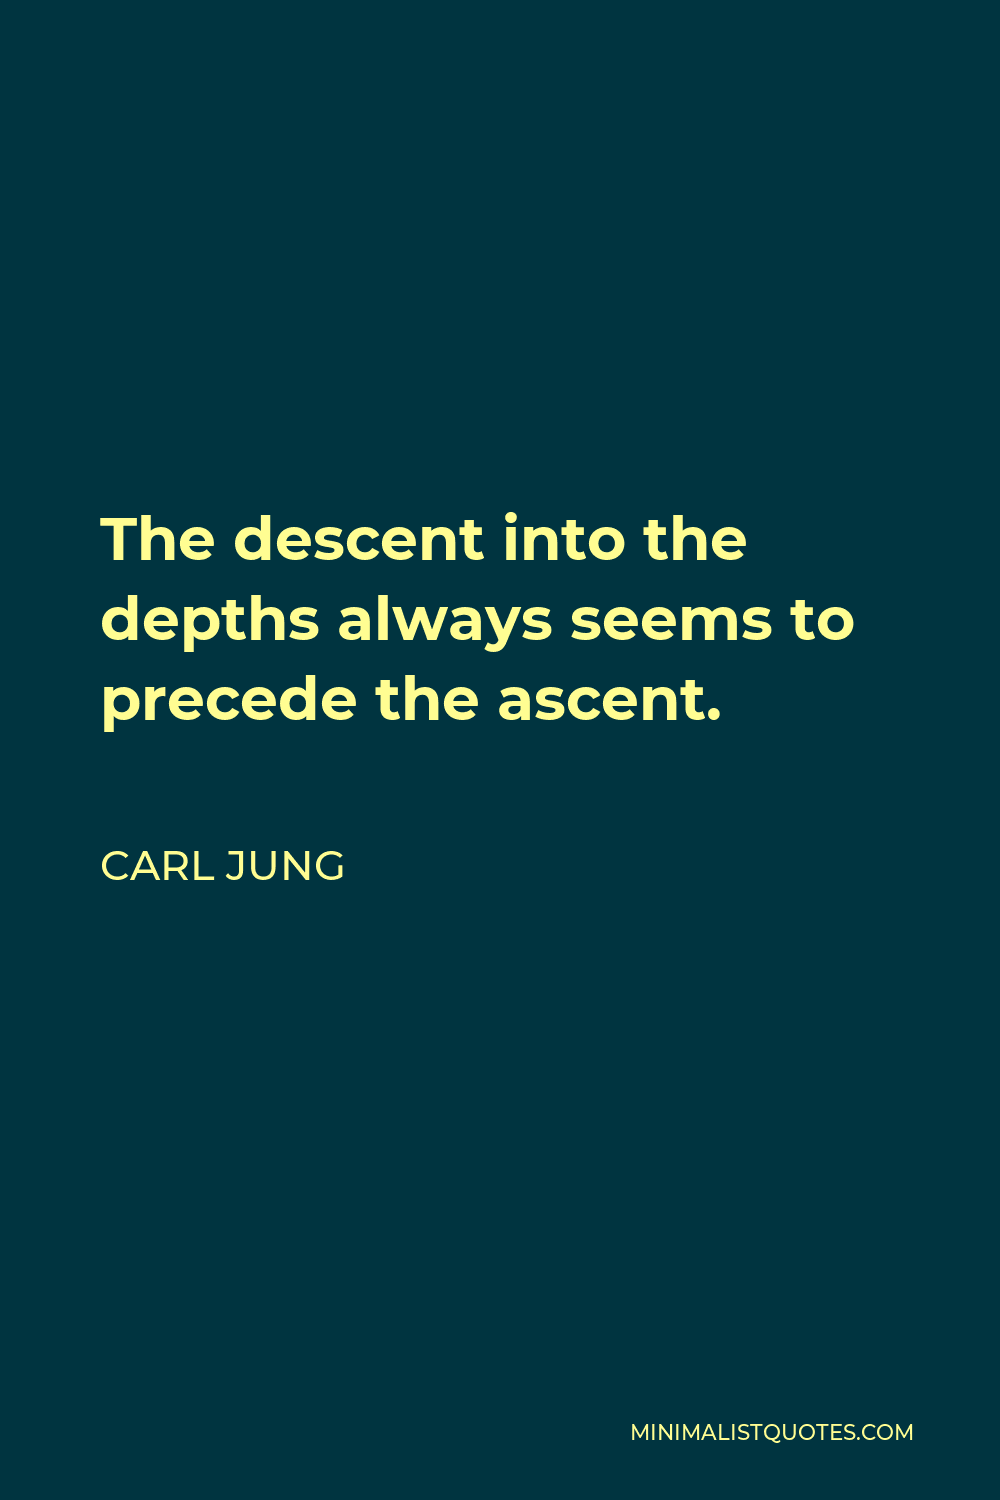 Carl Jung Quote - The descent into the depths always seems to precede the ascent.